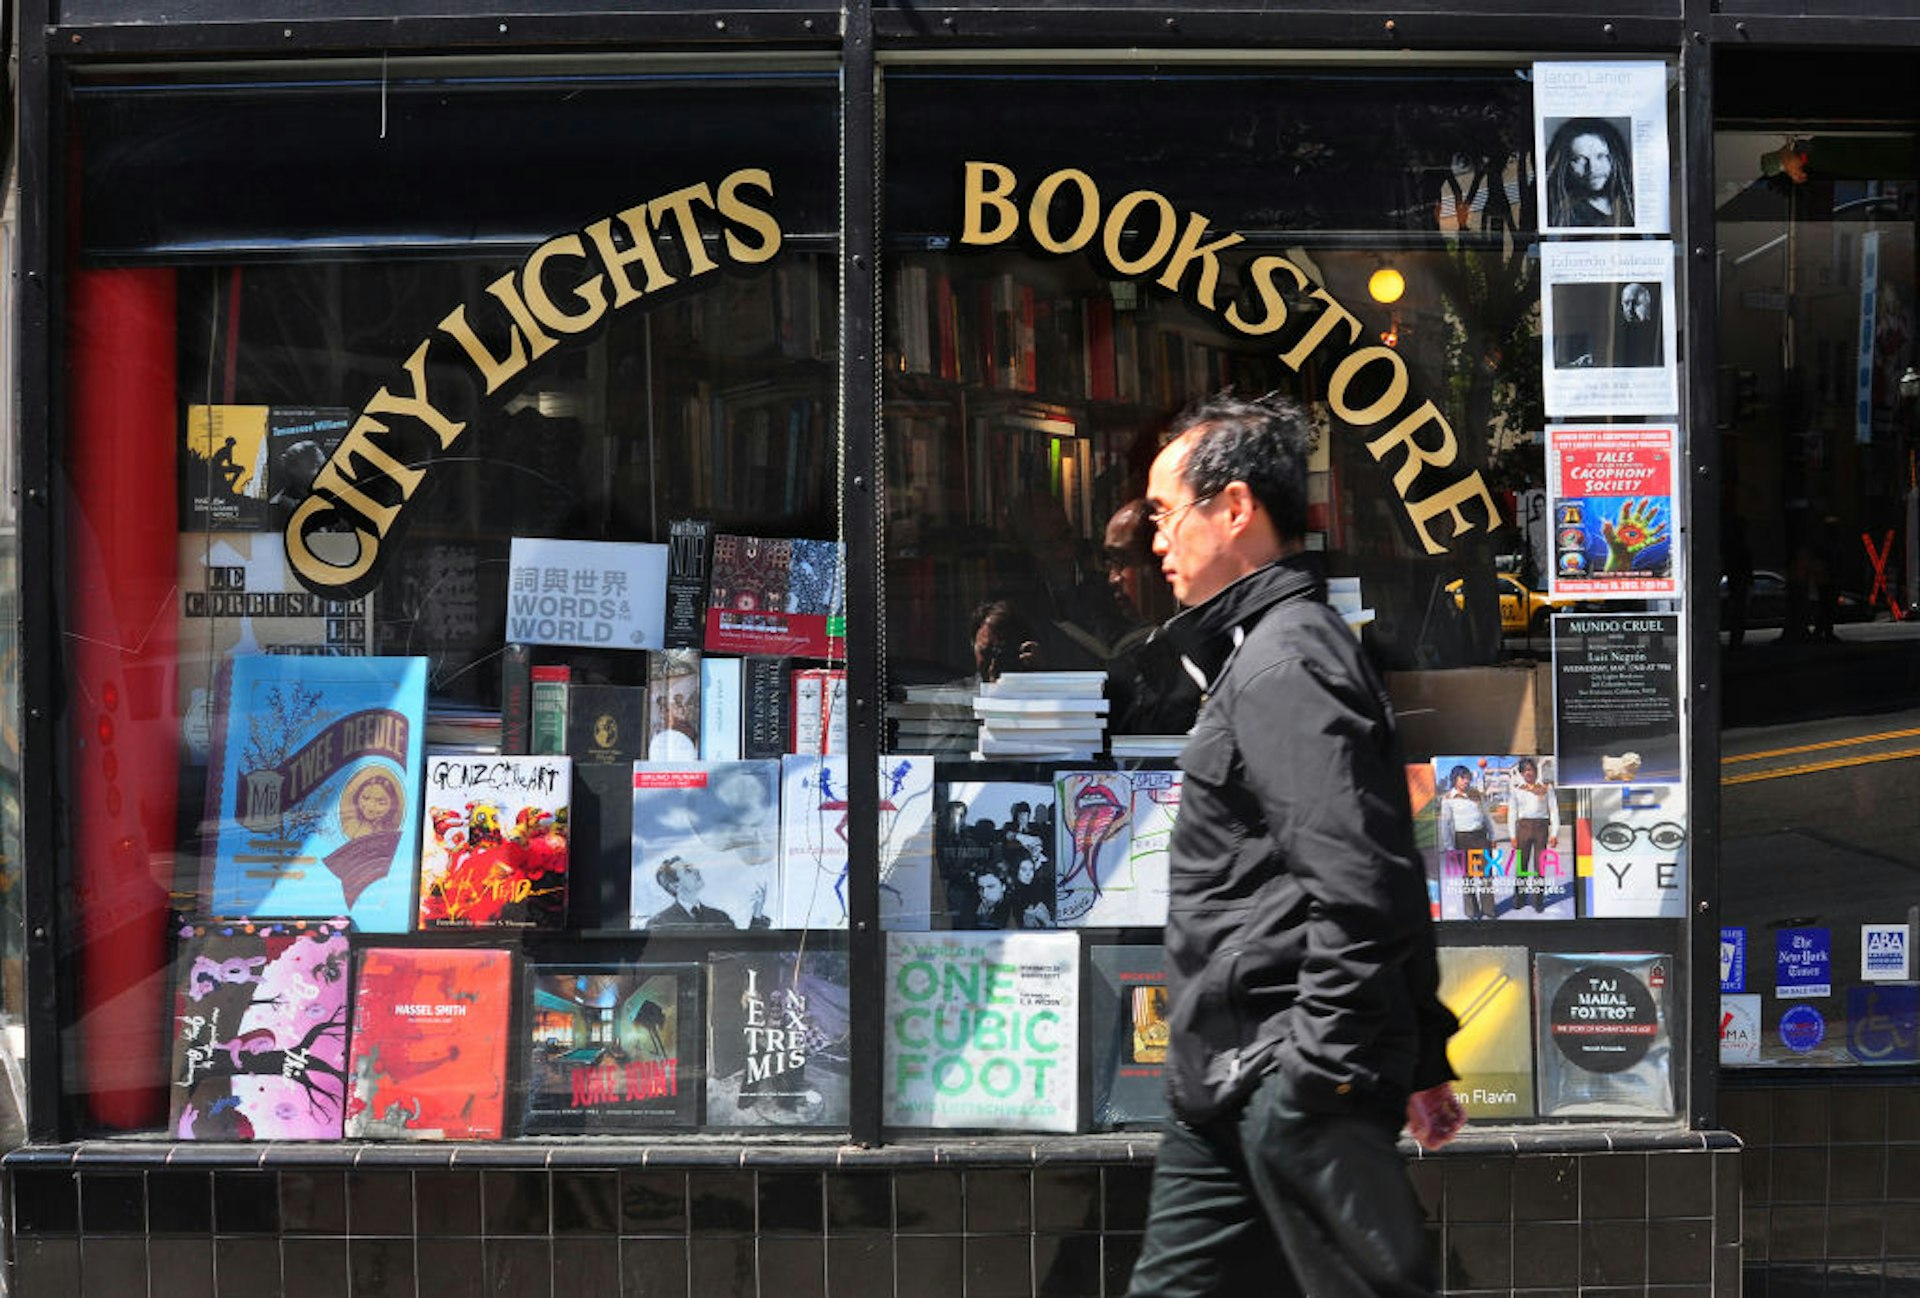 A man walks past the storefront of City Lights Bookstore. The store's window displays an array of colorful book covers and posters, reflecting a vibrant literary culture. The iconic City Lights sign is prominently featured above the window.